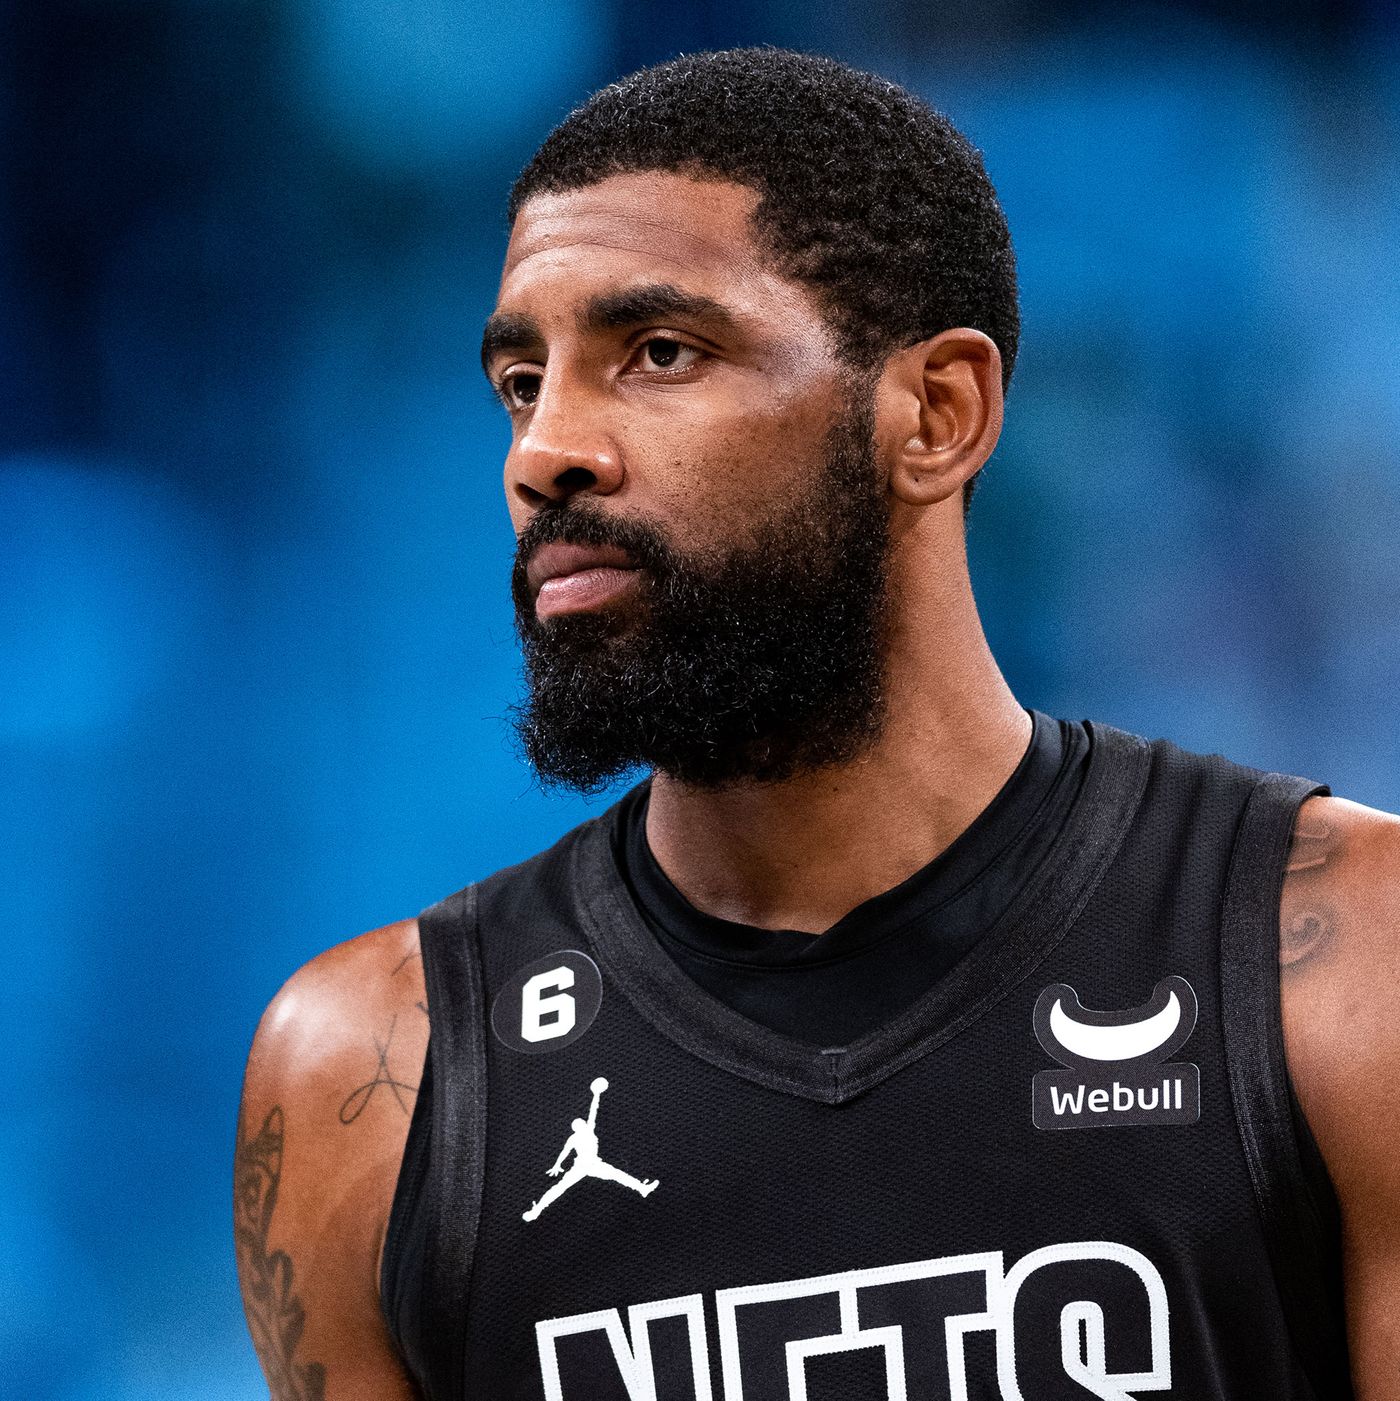 Black mask Kyrie Irving vs. clear mask Kyrie Irving — who wins?